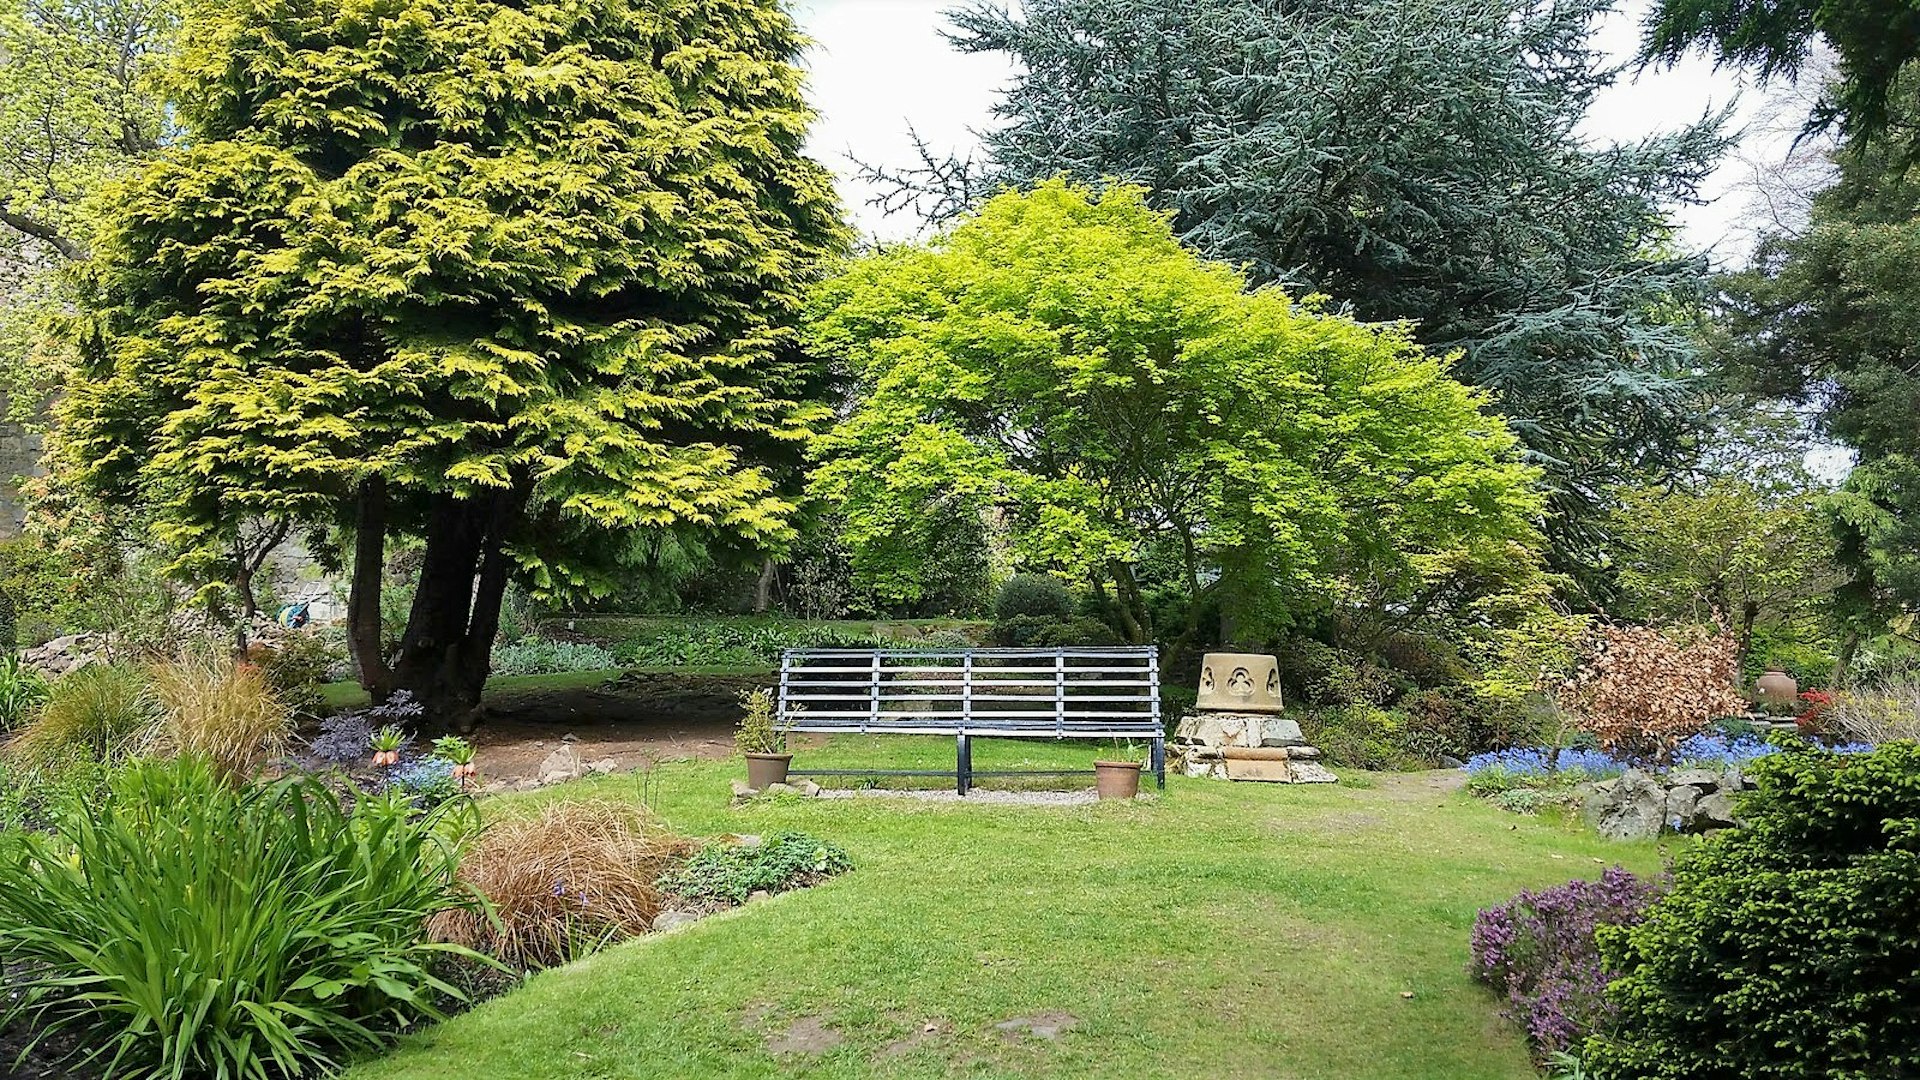 One of the perfectly placed benches at Dr Neil's Garden © Chitra Ramaswamy / Lonely Planet